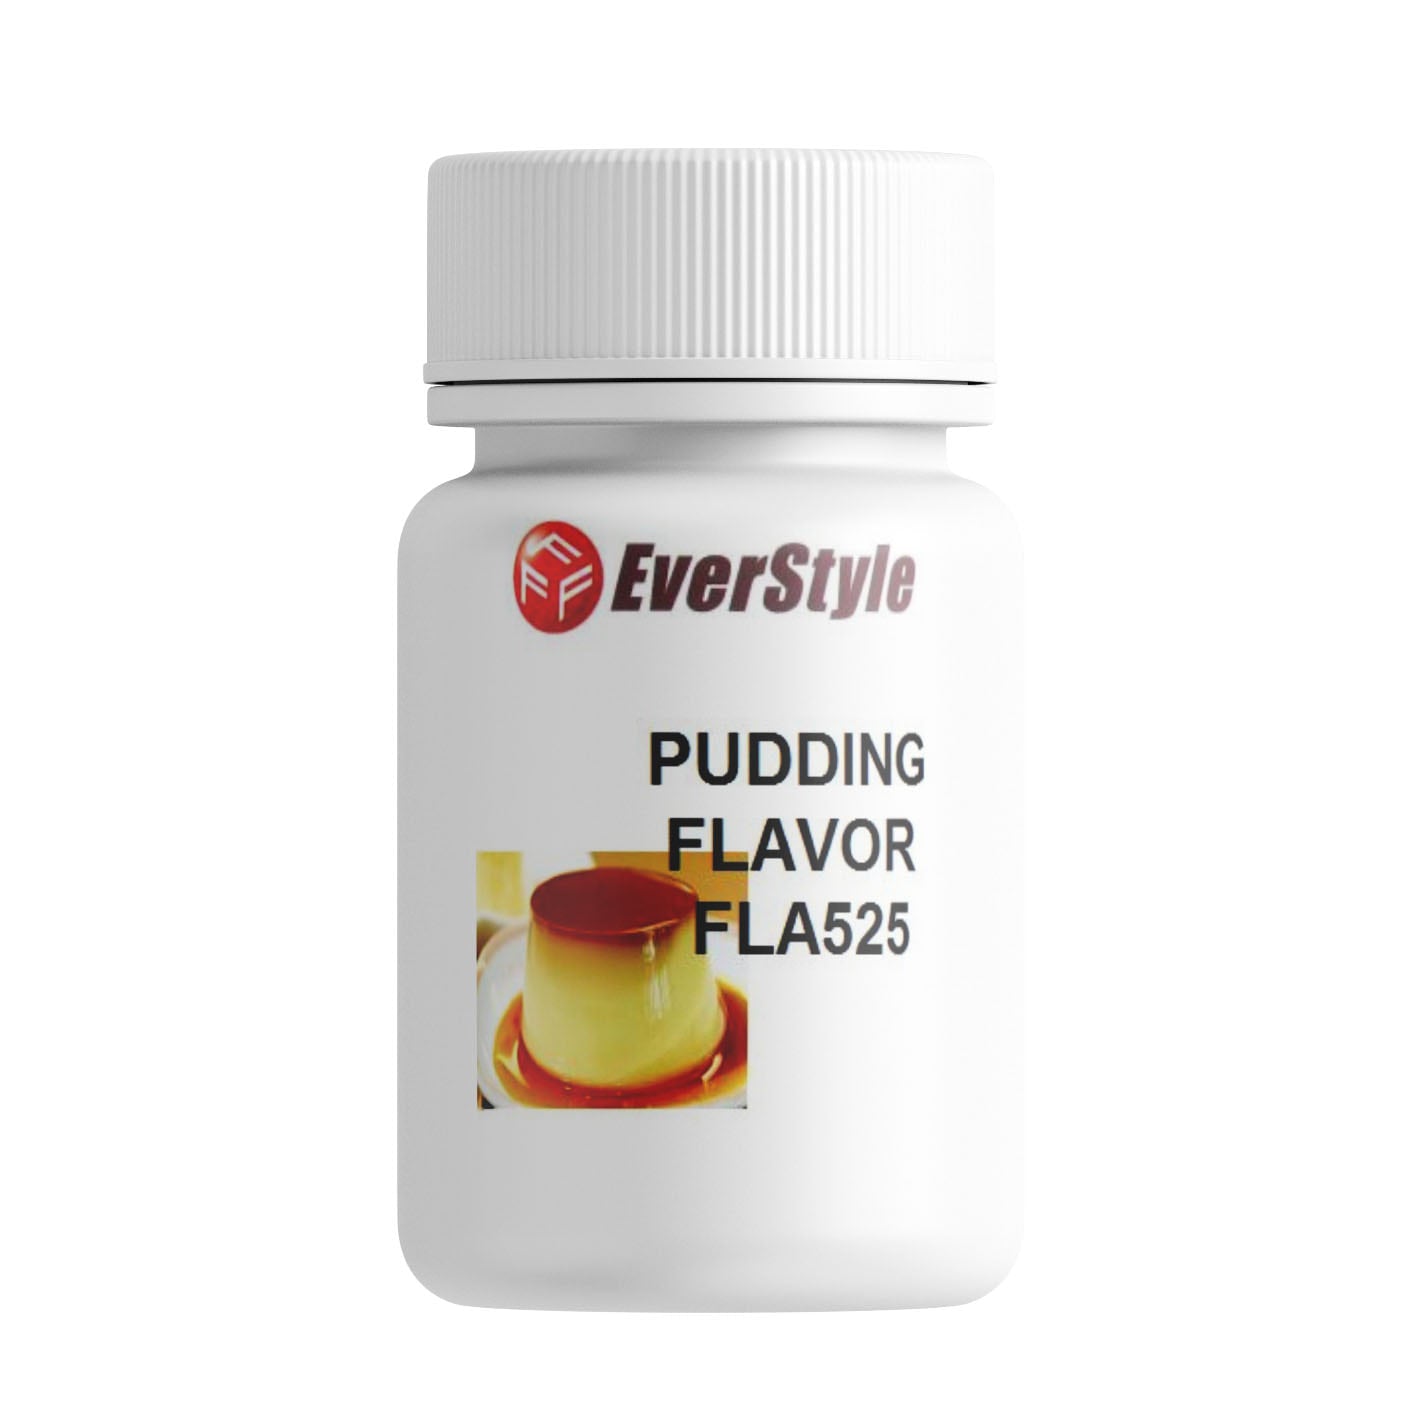 Everstyle Pudding Flavor 30g (FLA525)